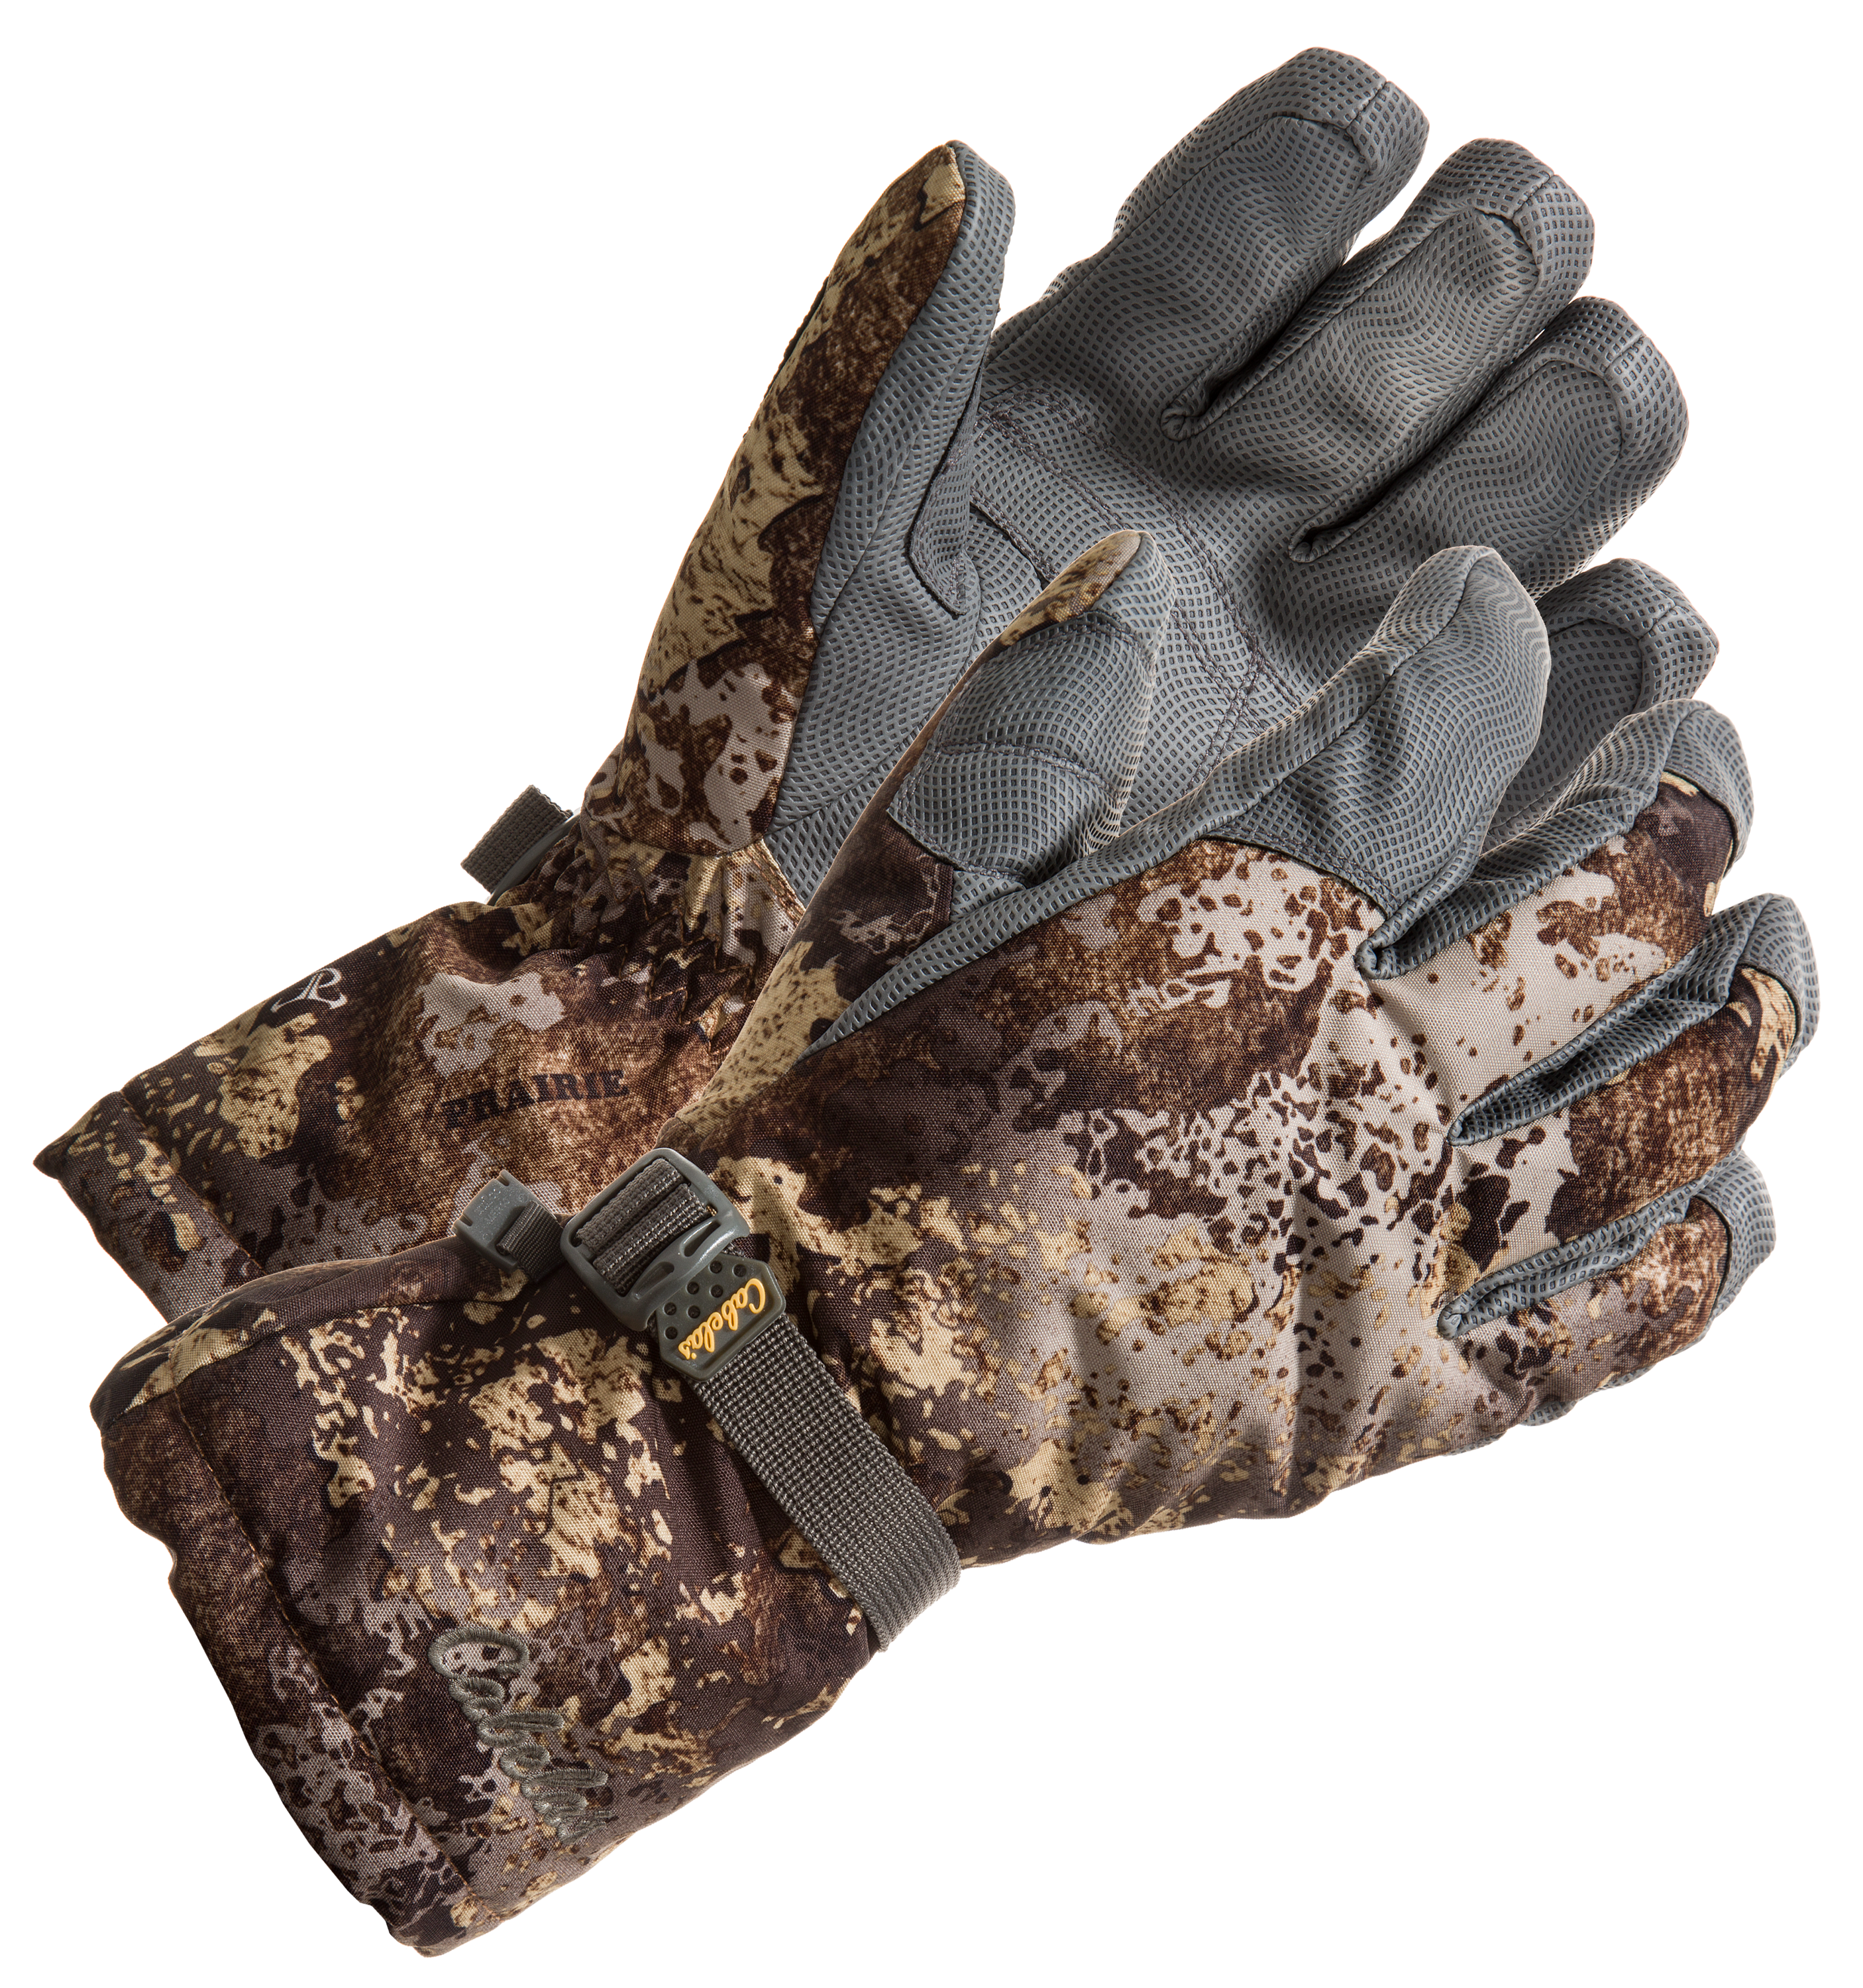 Cabela's Camoskinz II Unlined Gripper-Dot Gloves Mossy Oak Break-Up Country  - $6.88 (Free Shipping over $50)